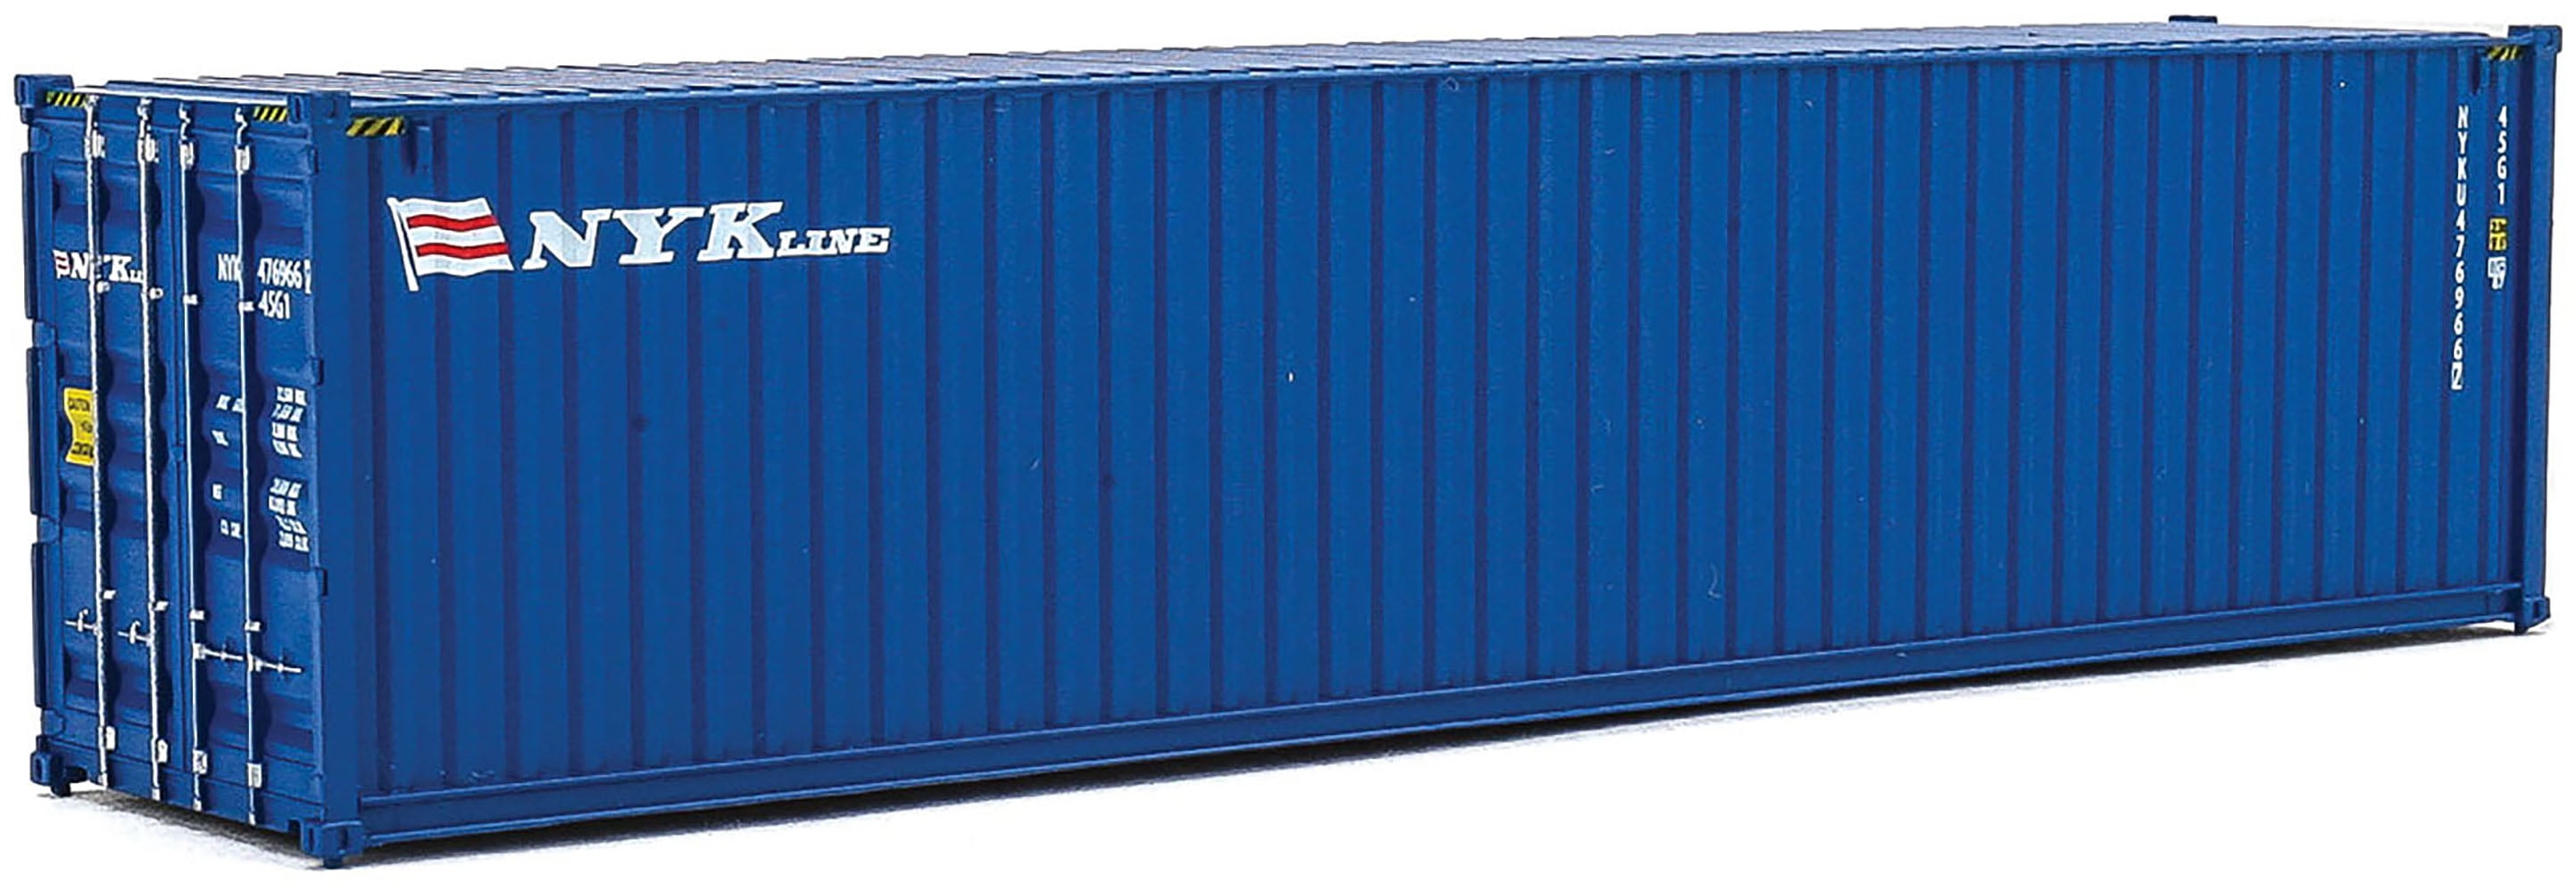 Walthers HO Scale 40' Hi-Cube Shipping Intermodal Container NYK Lines Blue 